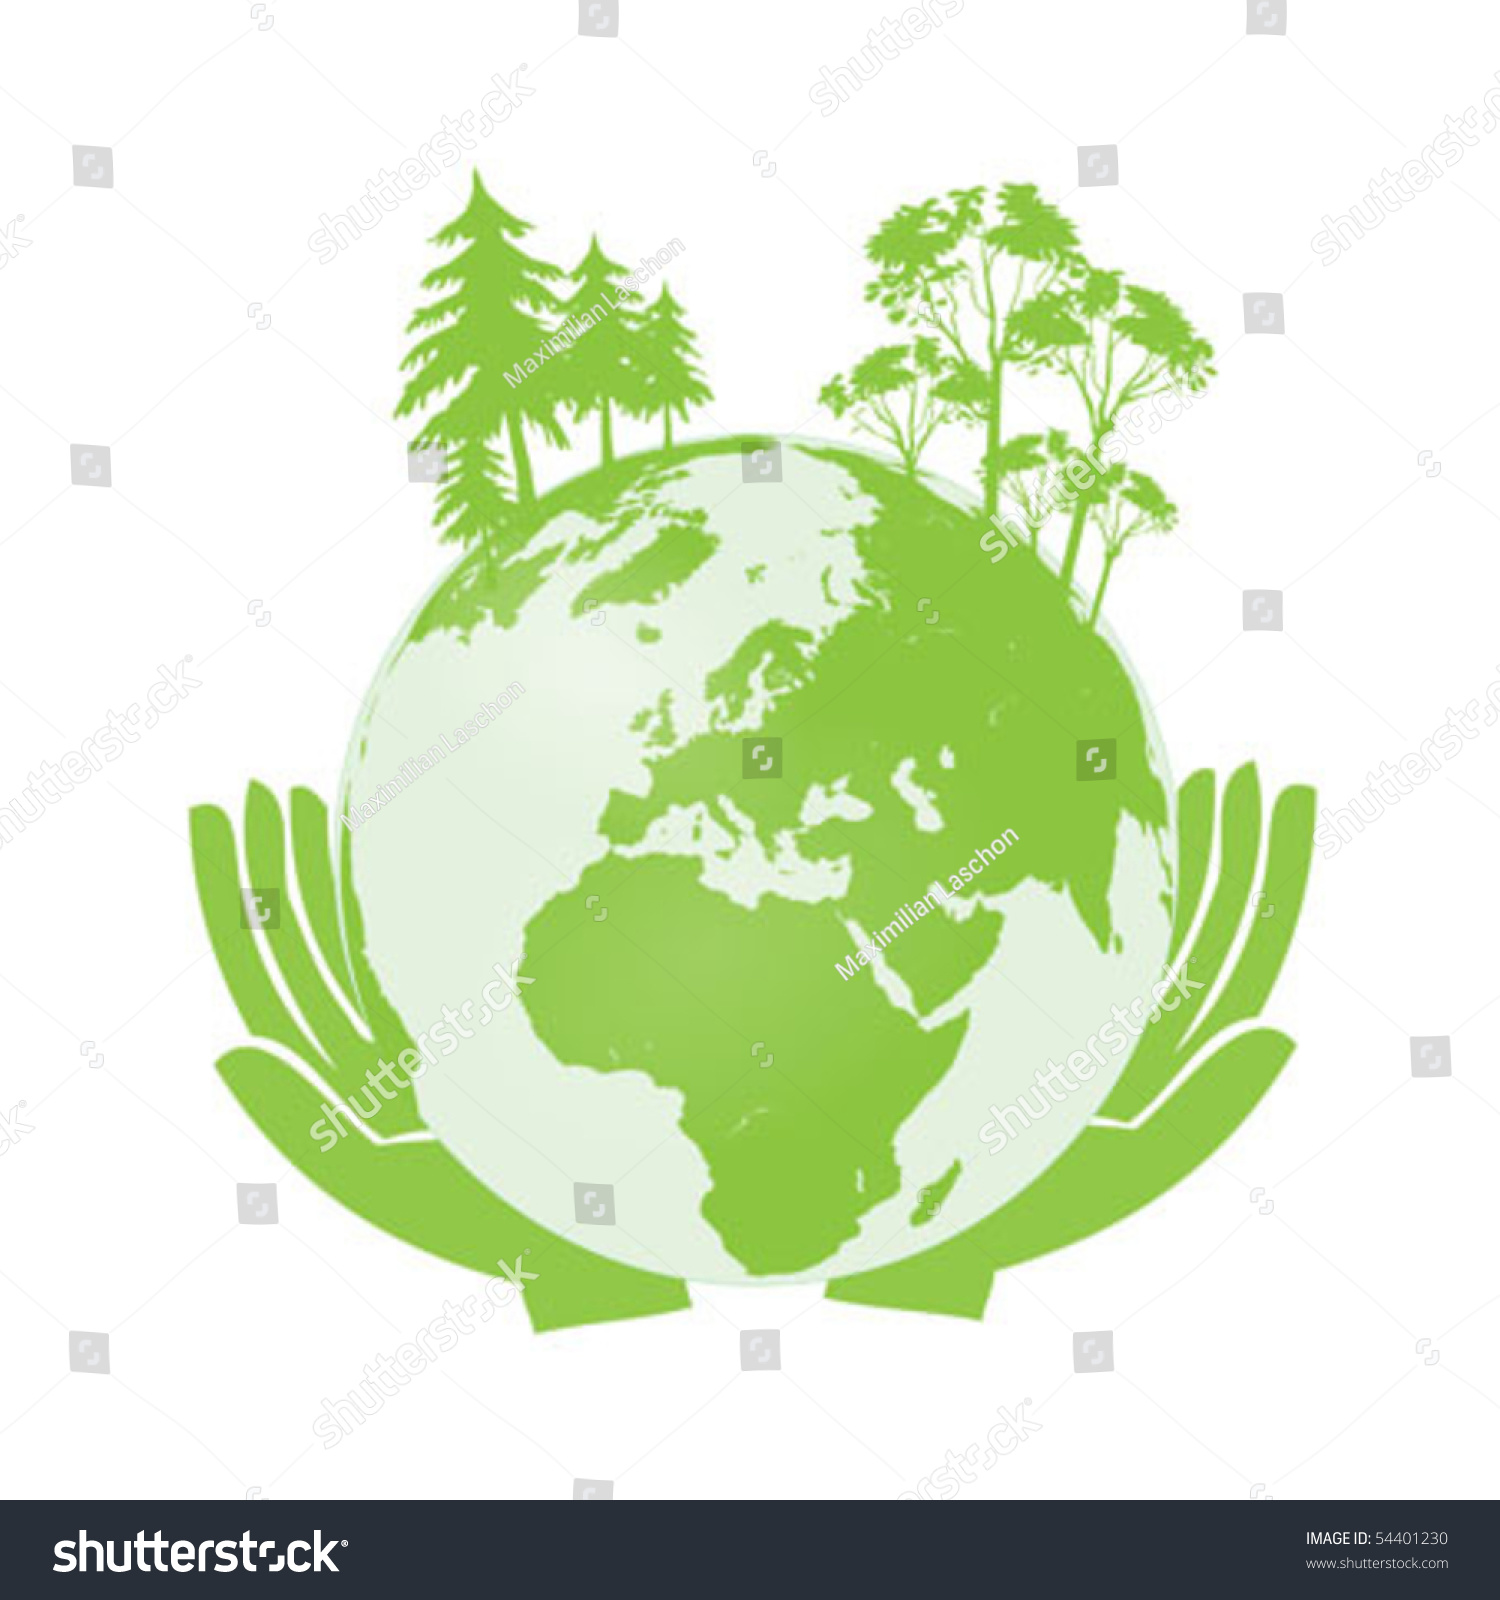 clipart images on save earth - photo #32